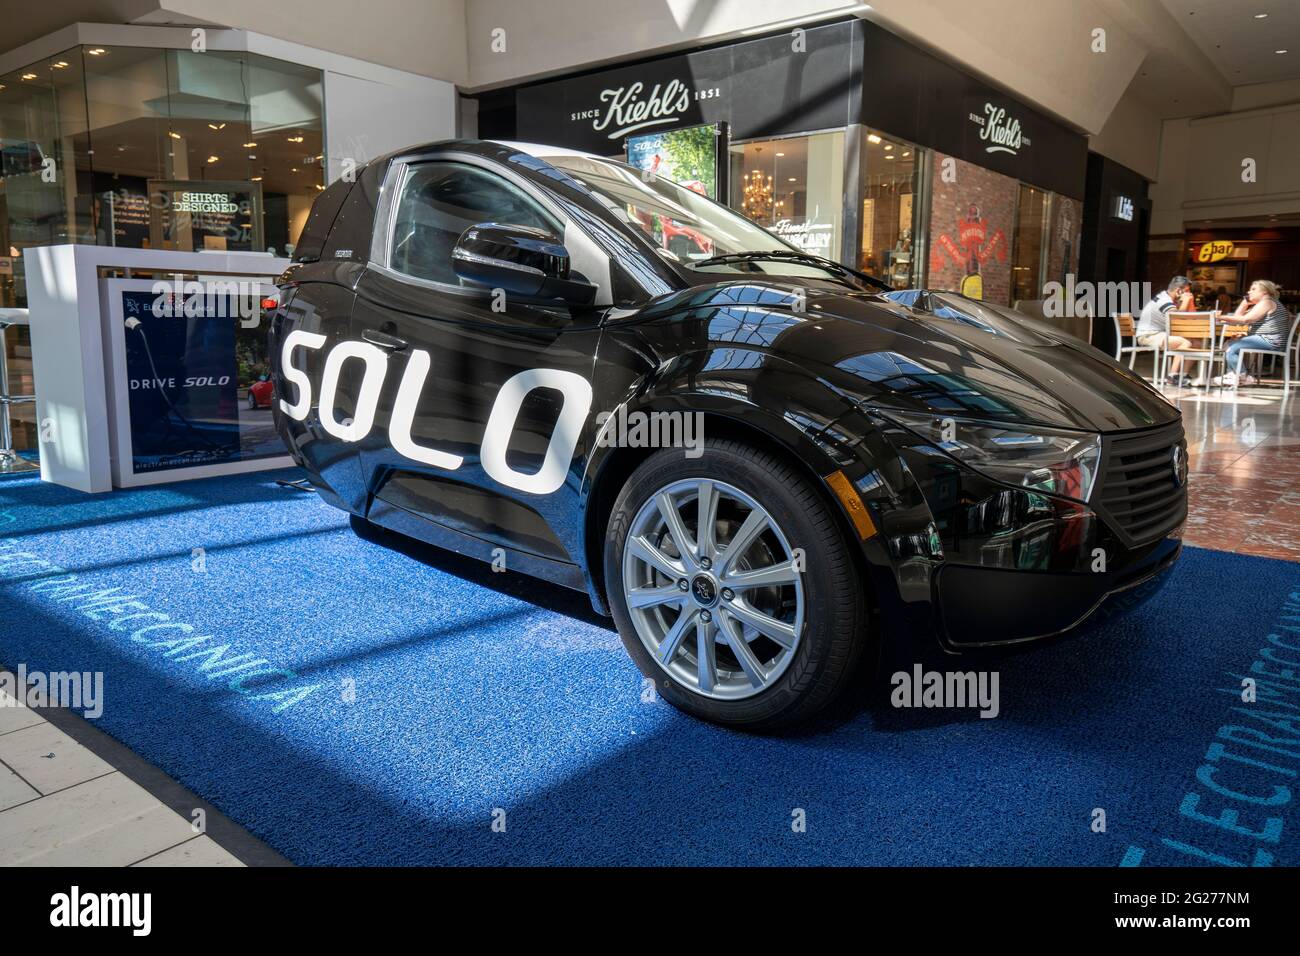 ElectraMeccanica Solo EV, a tiny three-wheeled electric car, is seen charging while on display in Washington Square Shopping Mall in Tigard, Oregon ... Stock Photo